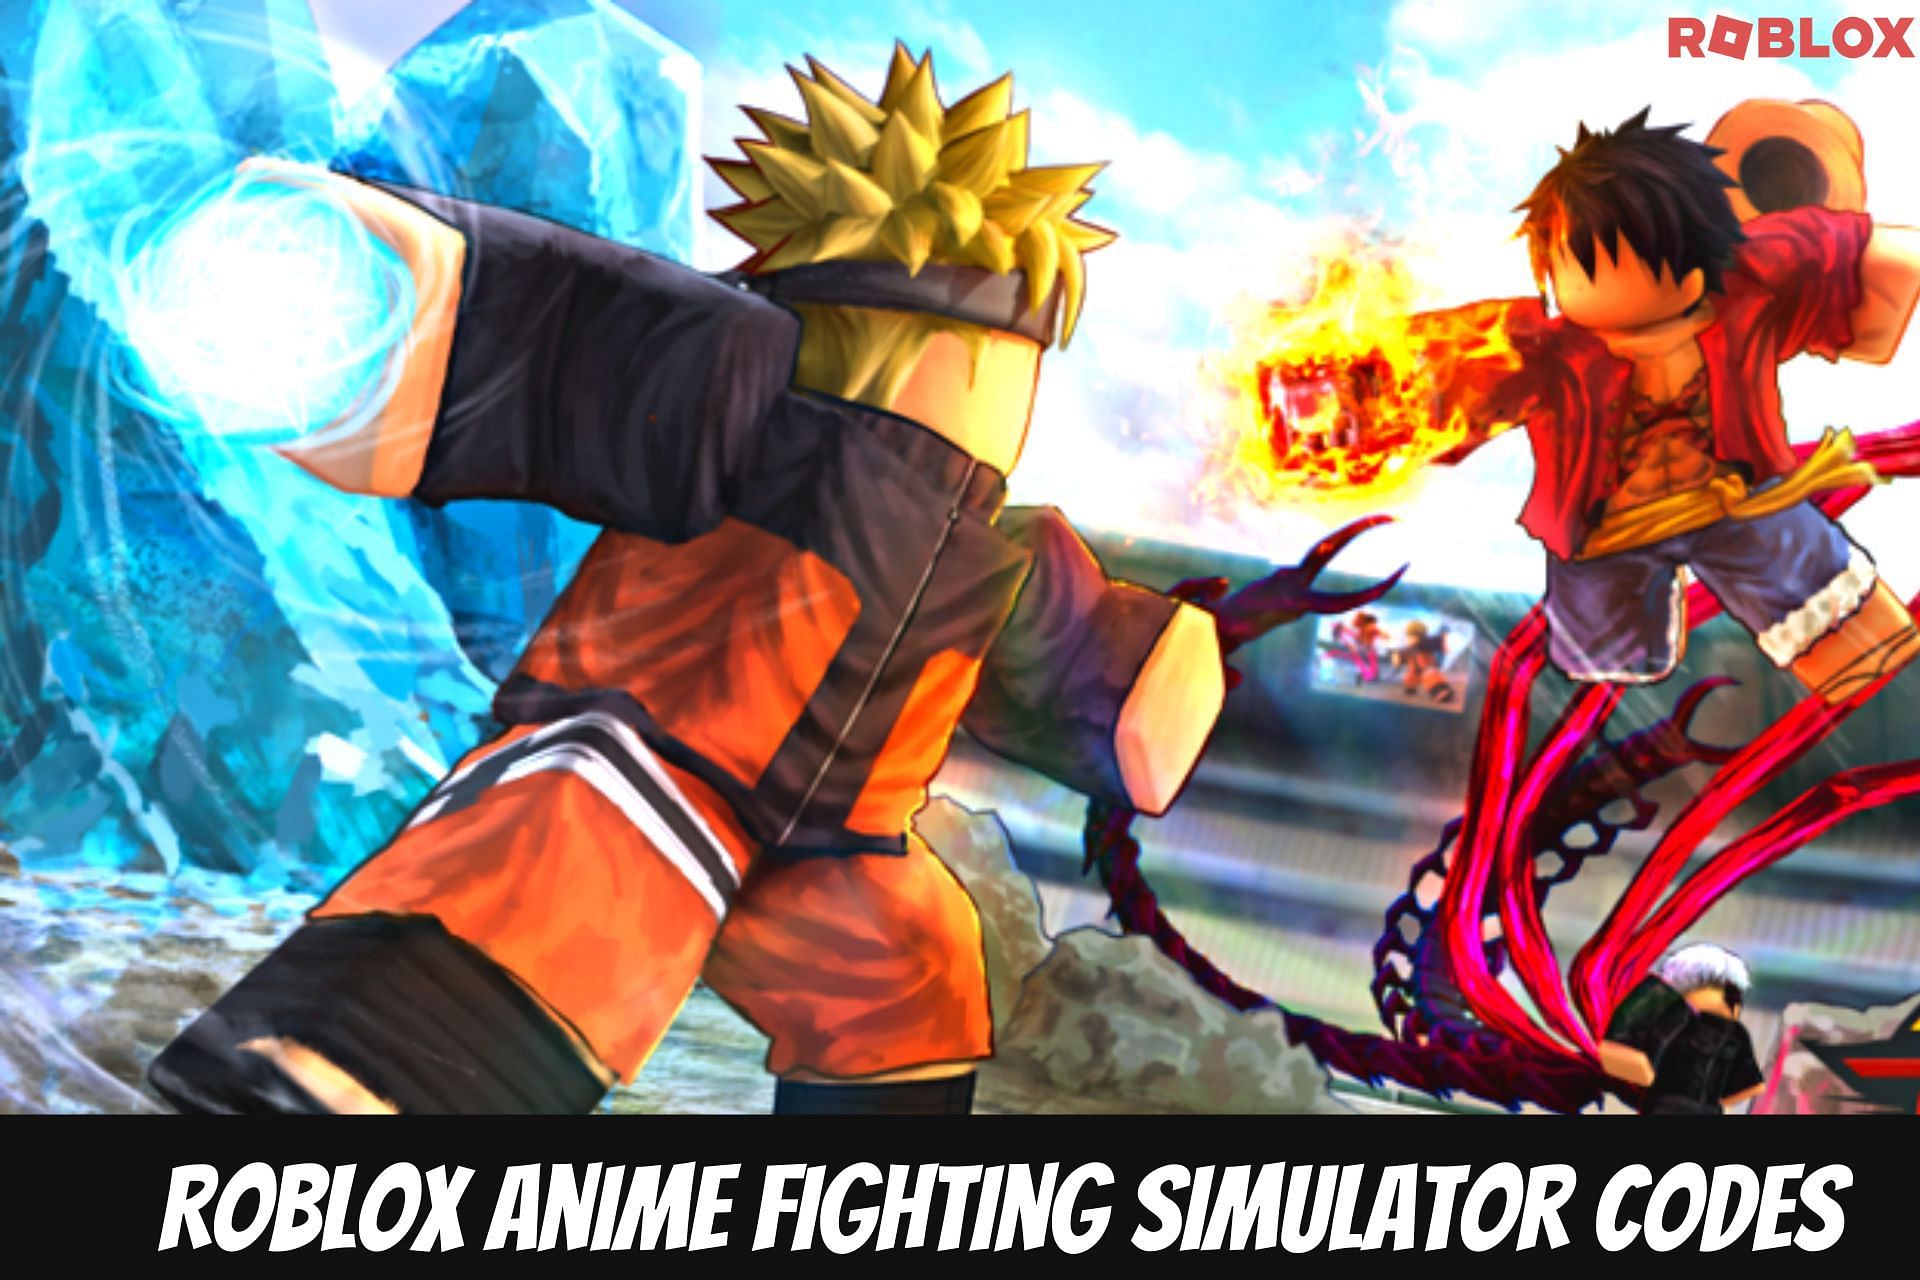 Anime Destruction Simulator codes in Roblox: Free Boosts and Yens (August  2022)